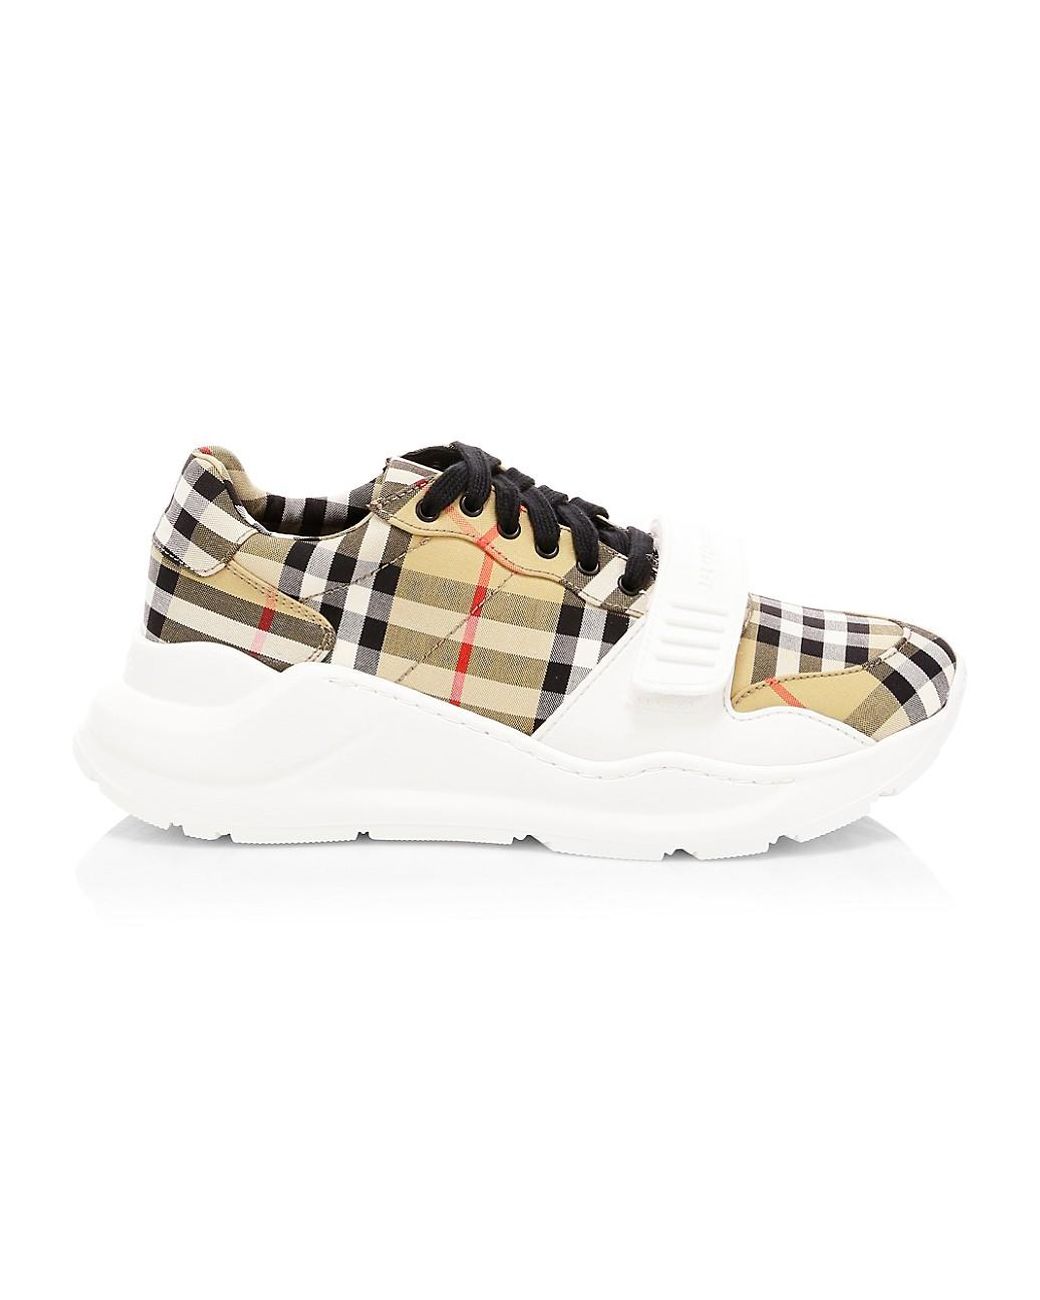 Burberry Cotton Regis Chunky Sneakers - Save 40% - Lyst